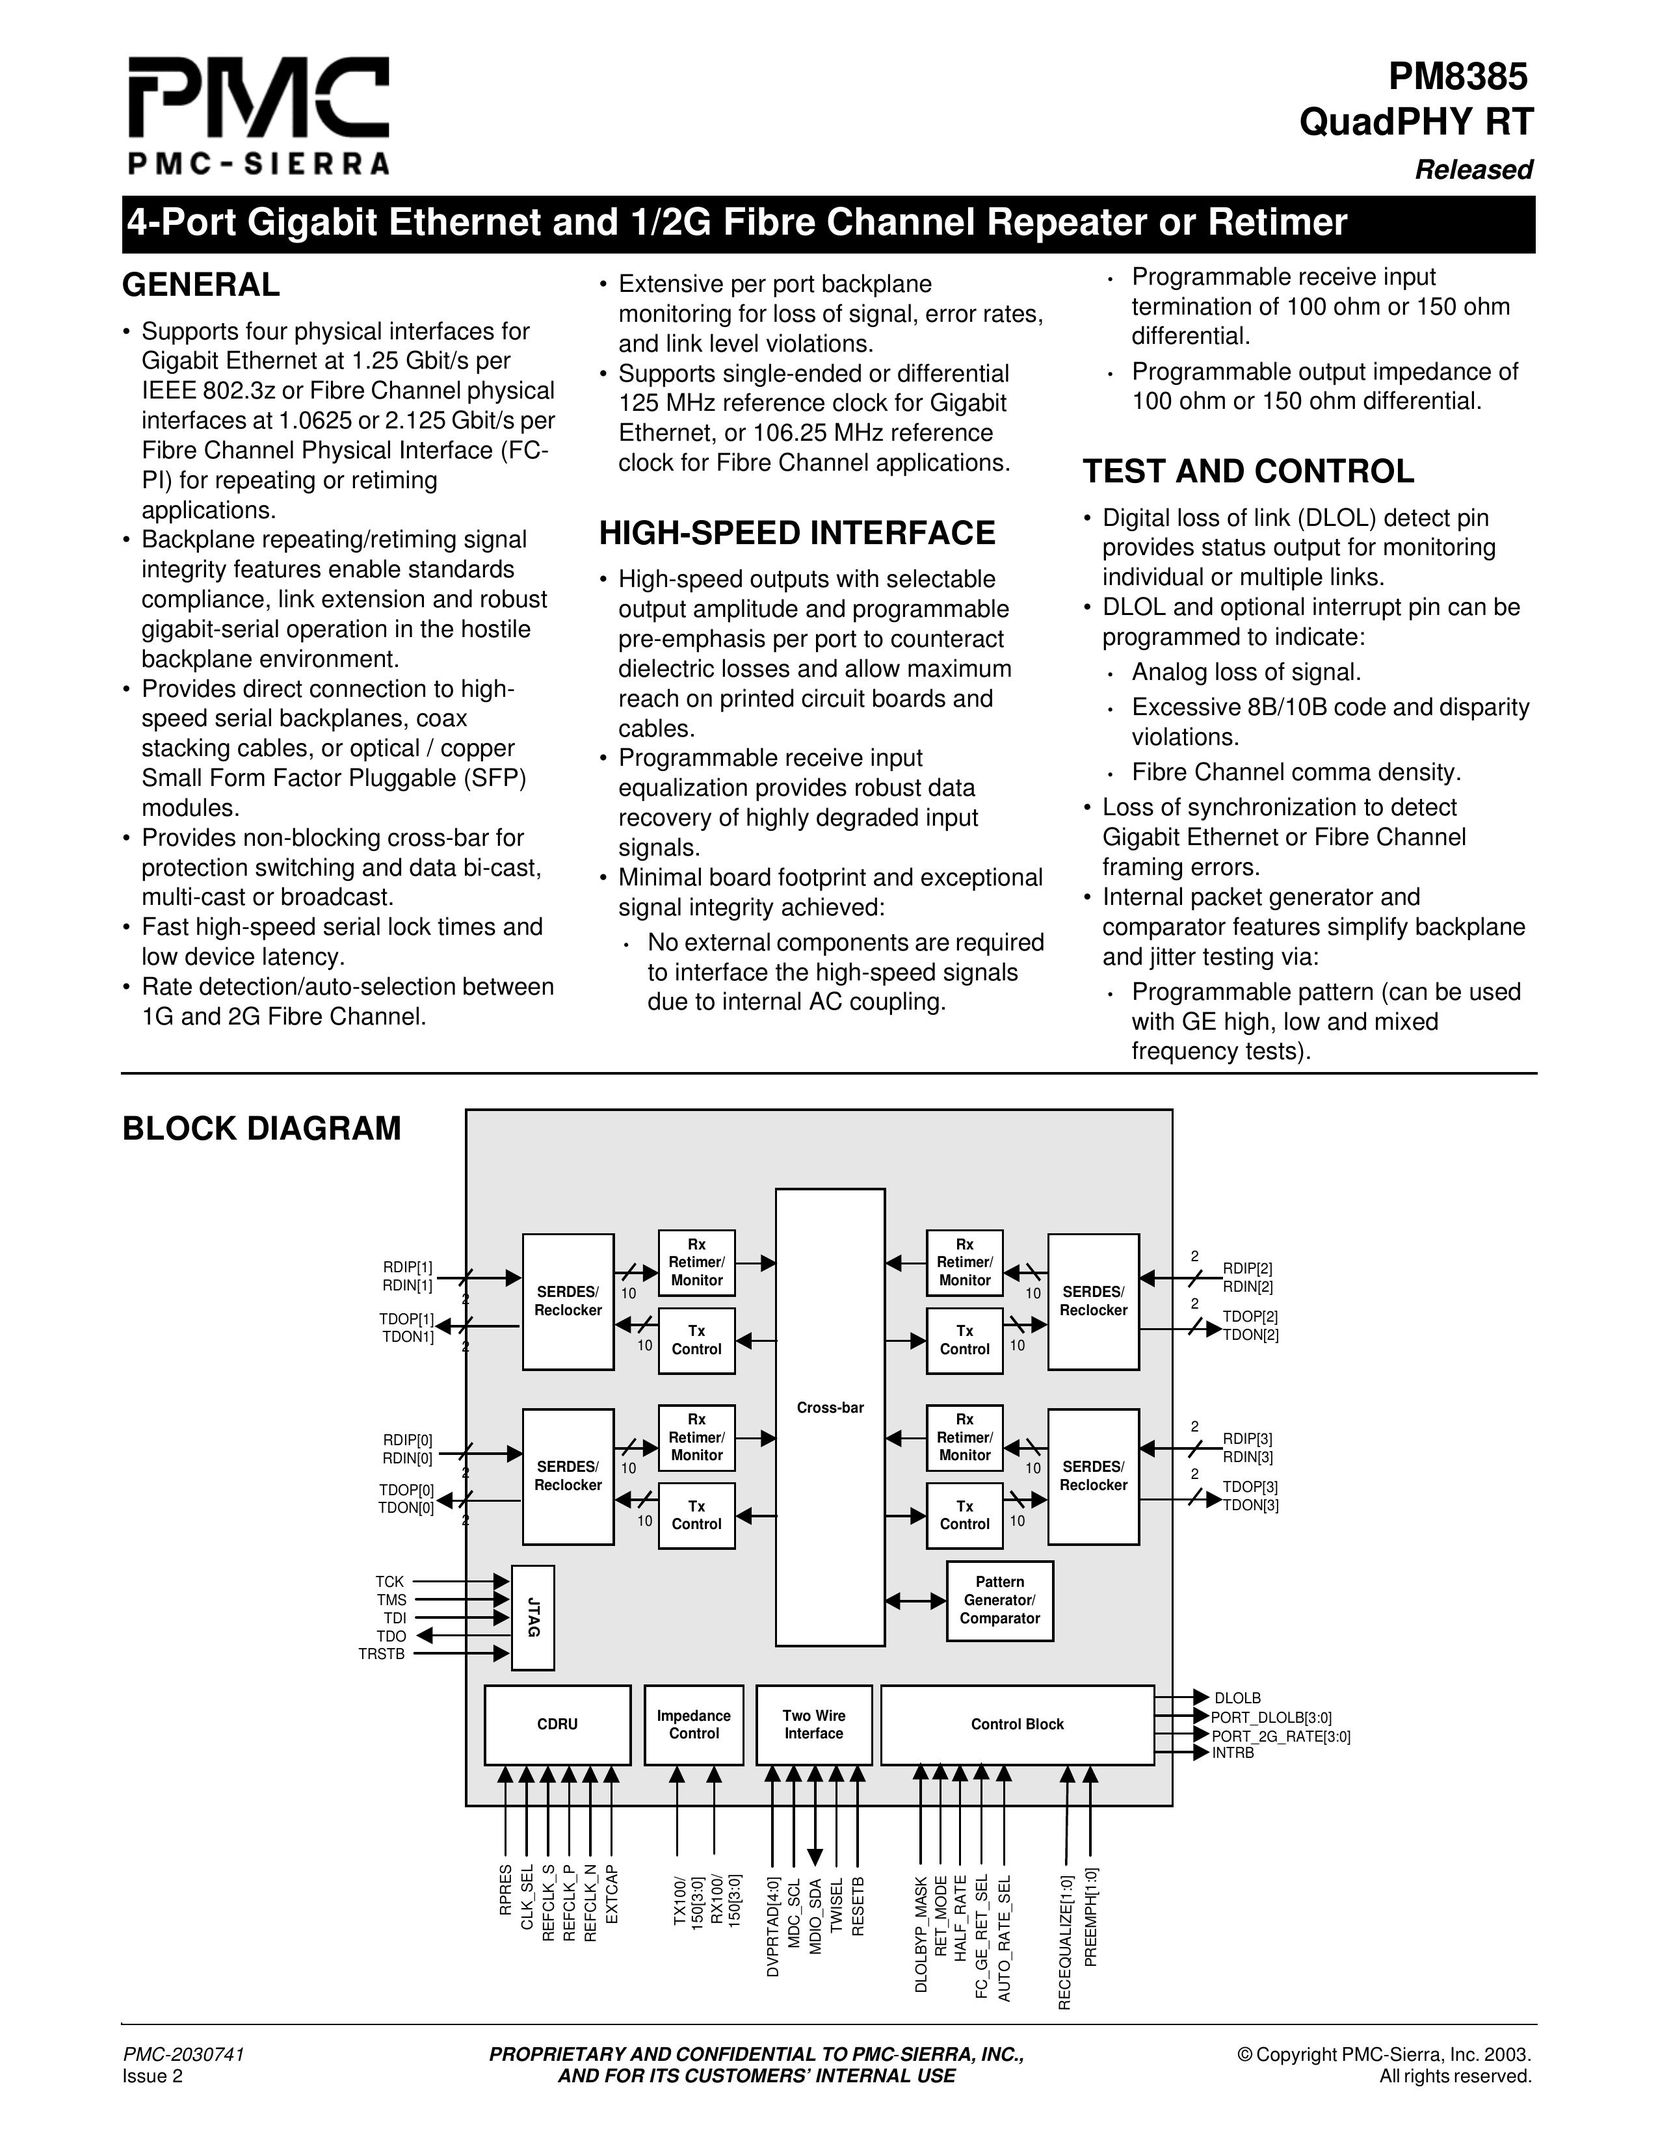 PMC-Sierra PM8385 Network Card User Manual